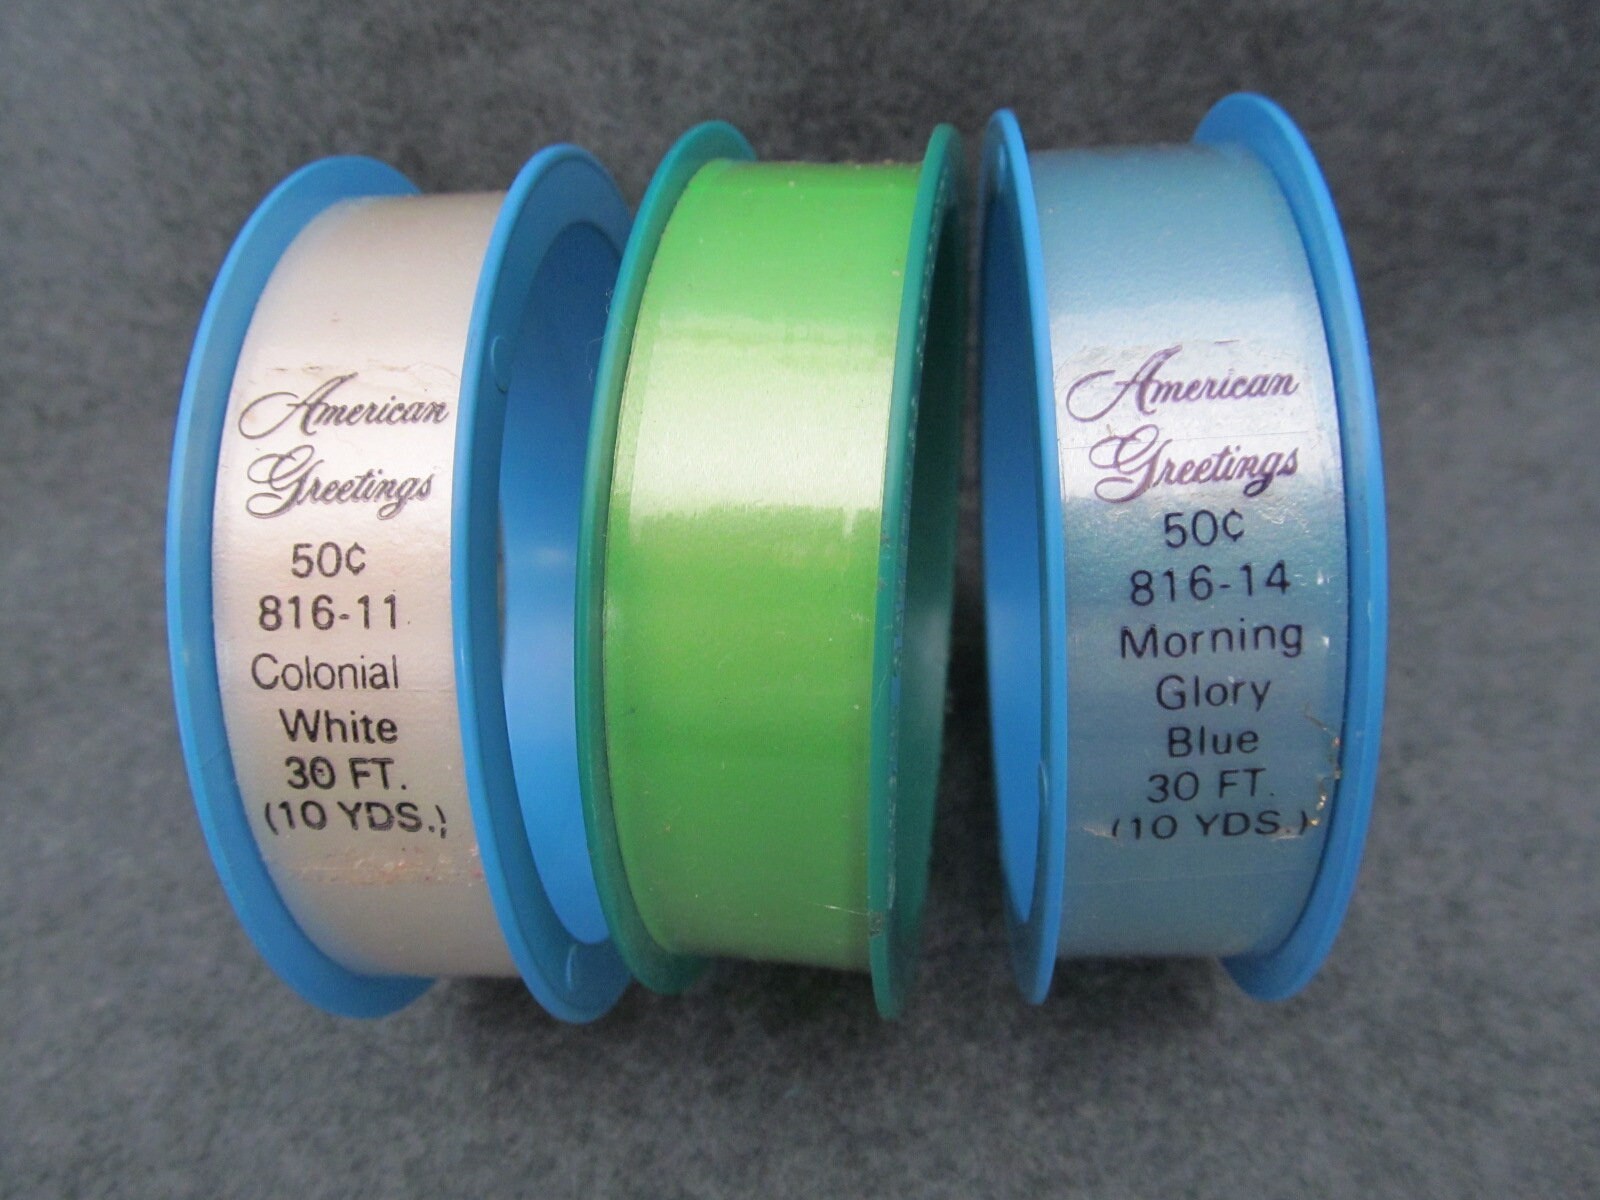 Happy Birthday Ribbon 25mm, Priced by 2m Best Wishes Ribbon With